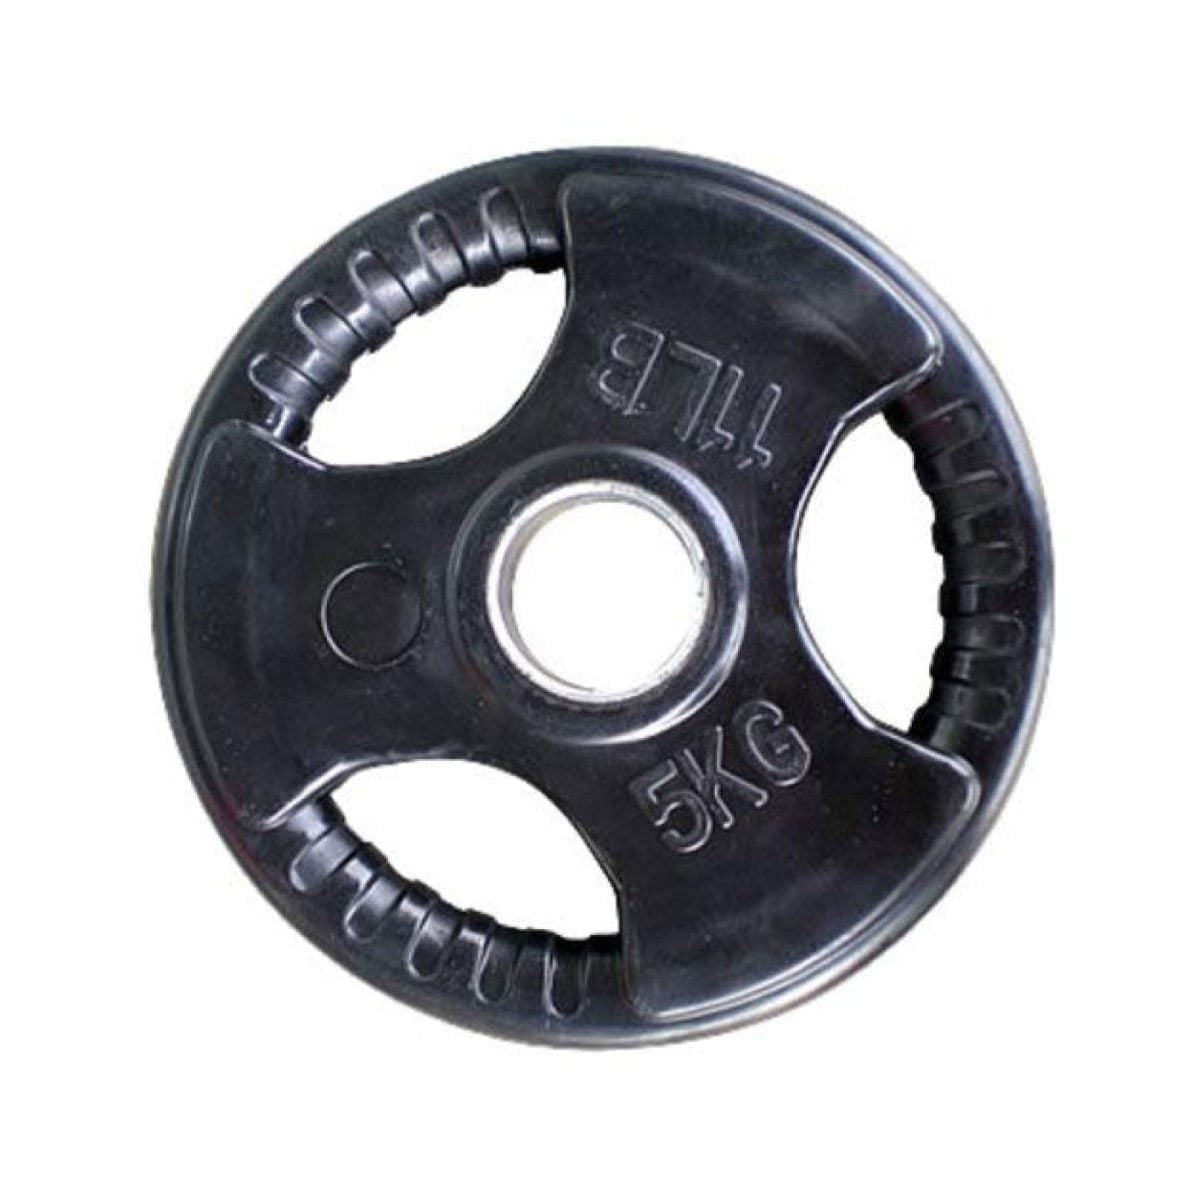 Weight Plate 5 Kg